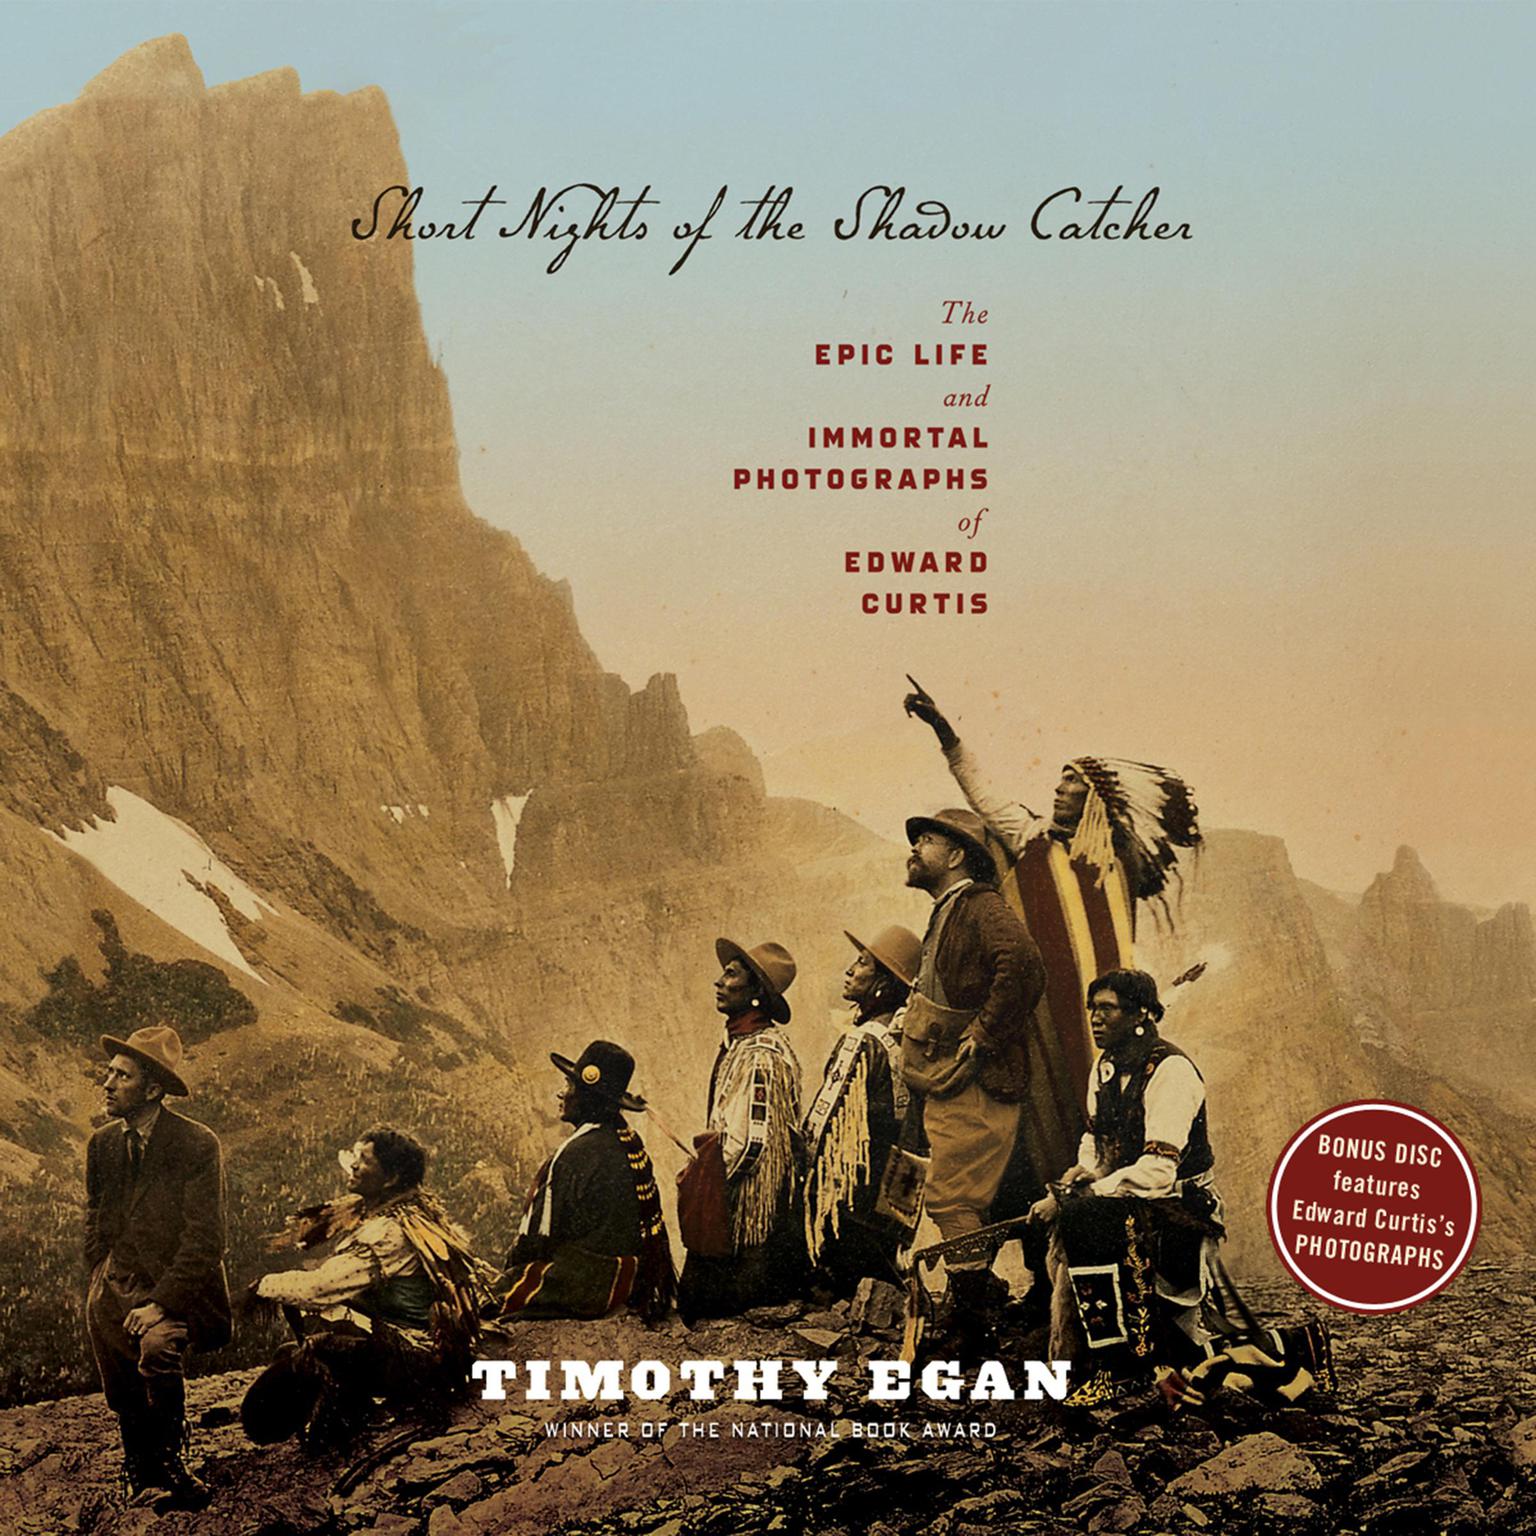 Short Nights of the Shadow Catcher: The Epic Life and Immortal Photographs of Edward Curtis Audiobook, by Timothy Egan